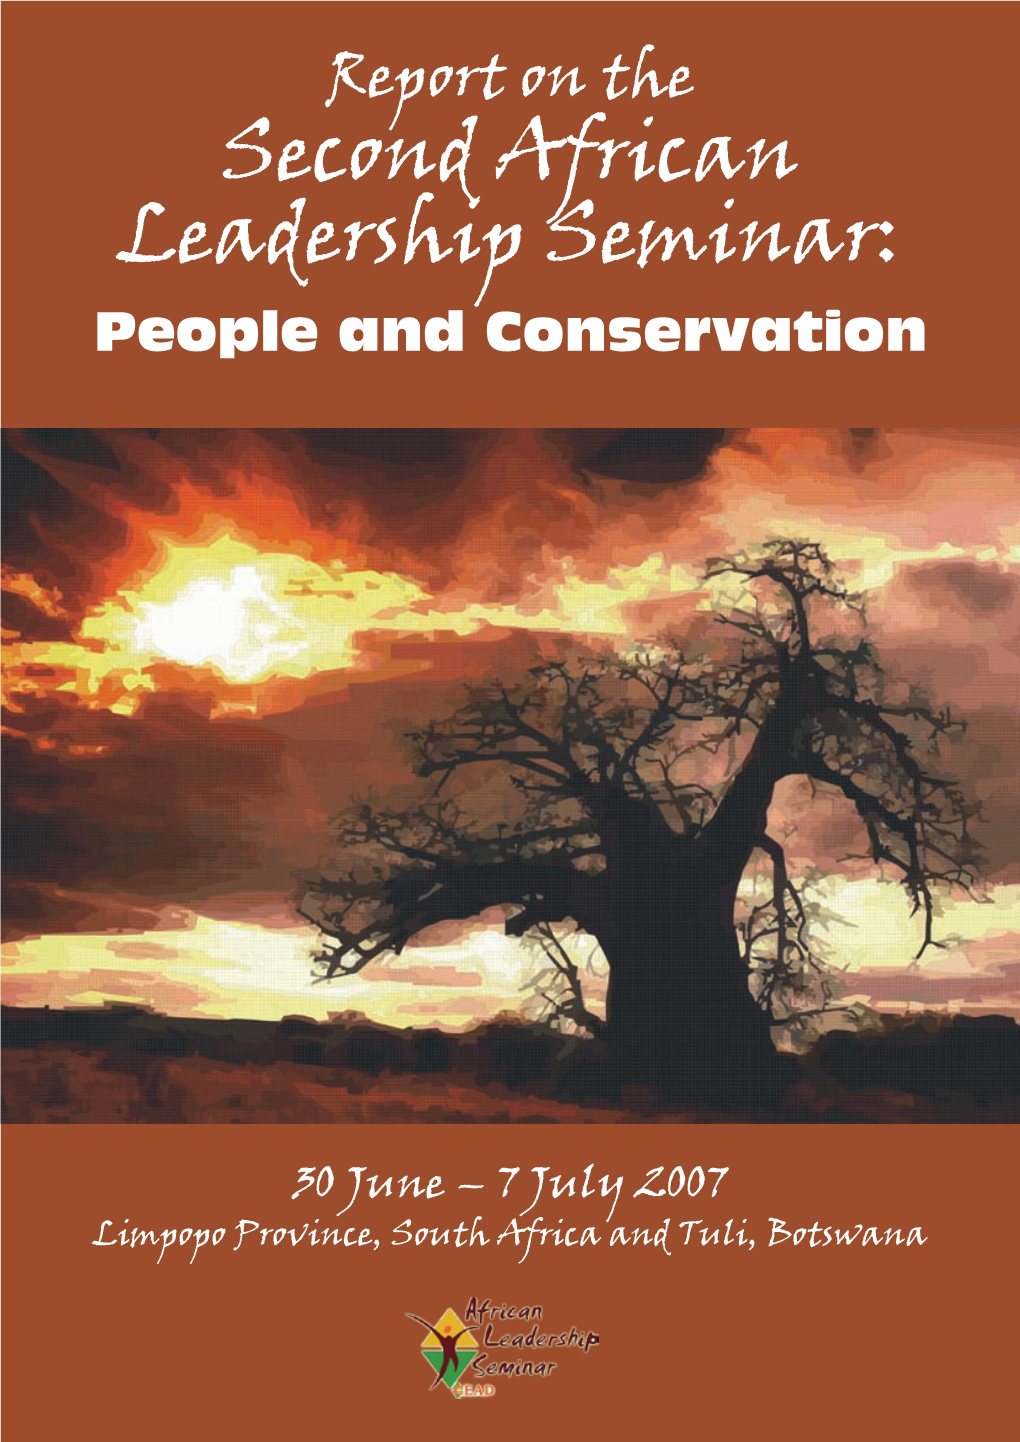 Second African Leadership Seminar: People and Conservation